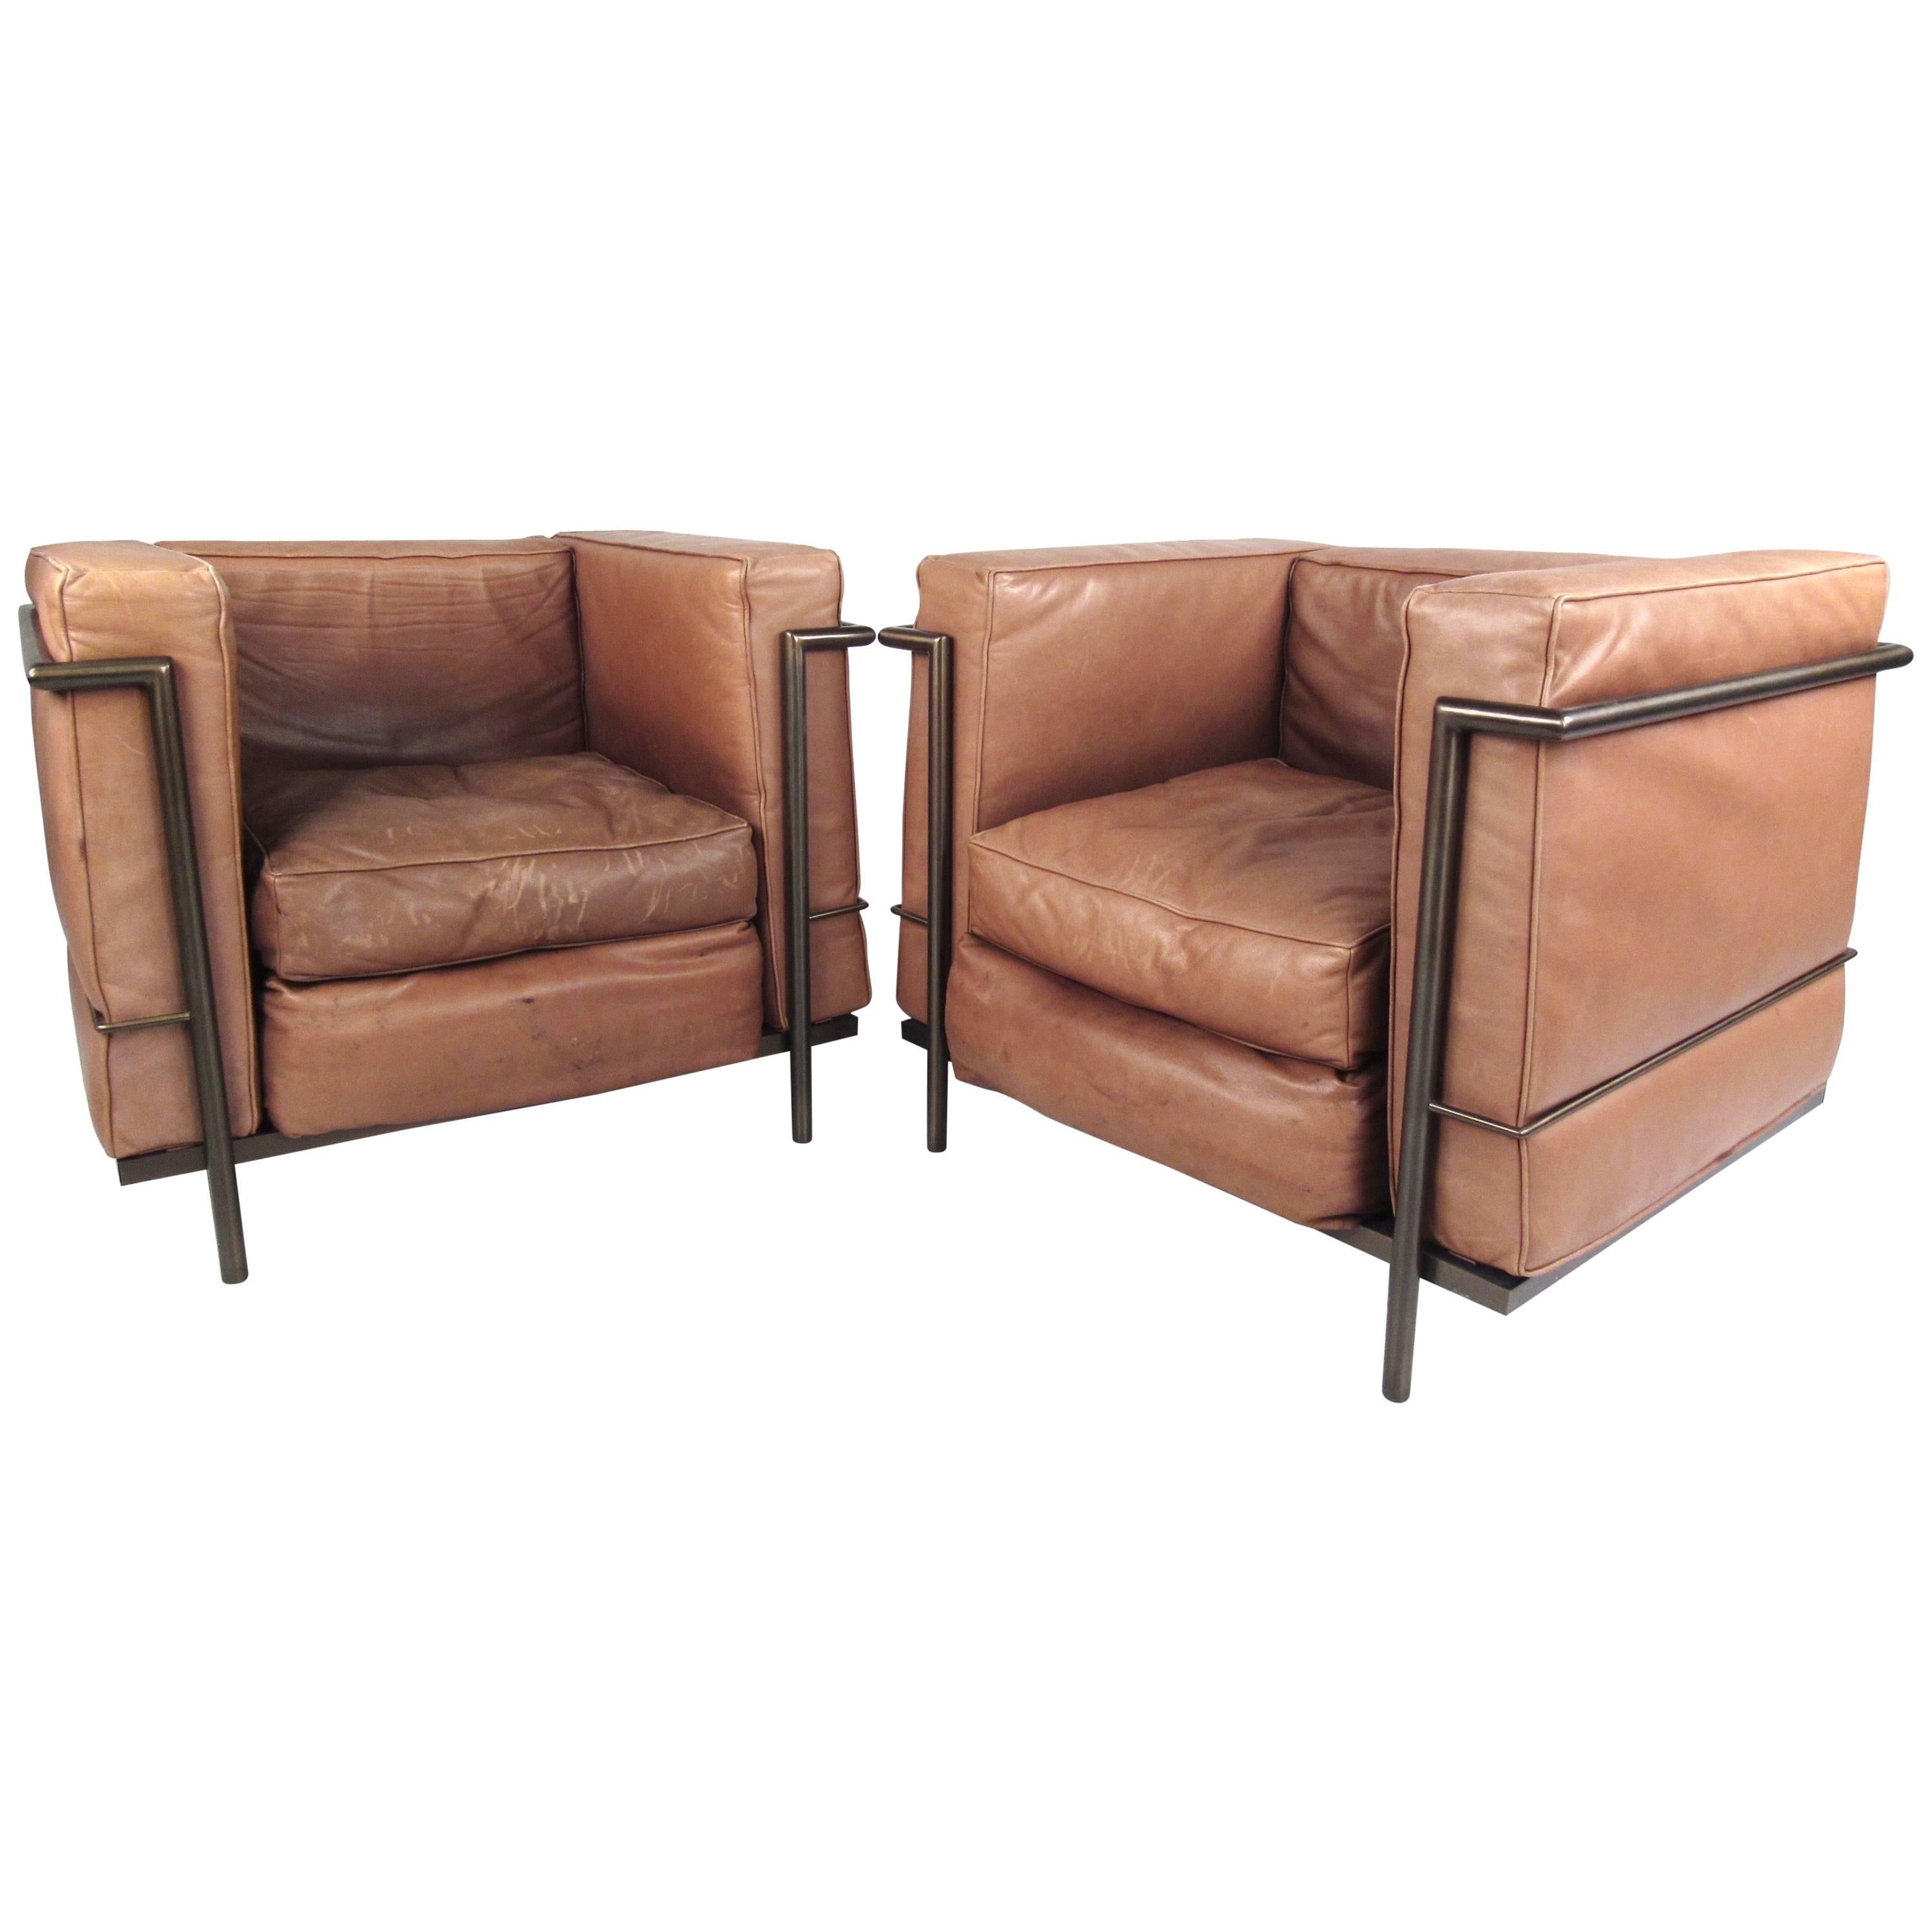 Pair of Vintage Modern Le Corbusier Style Leather and Brass Lounge Chairs